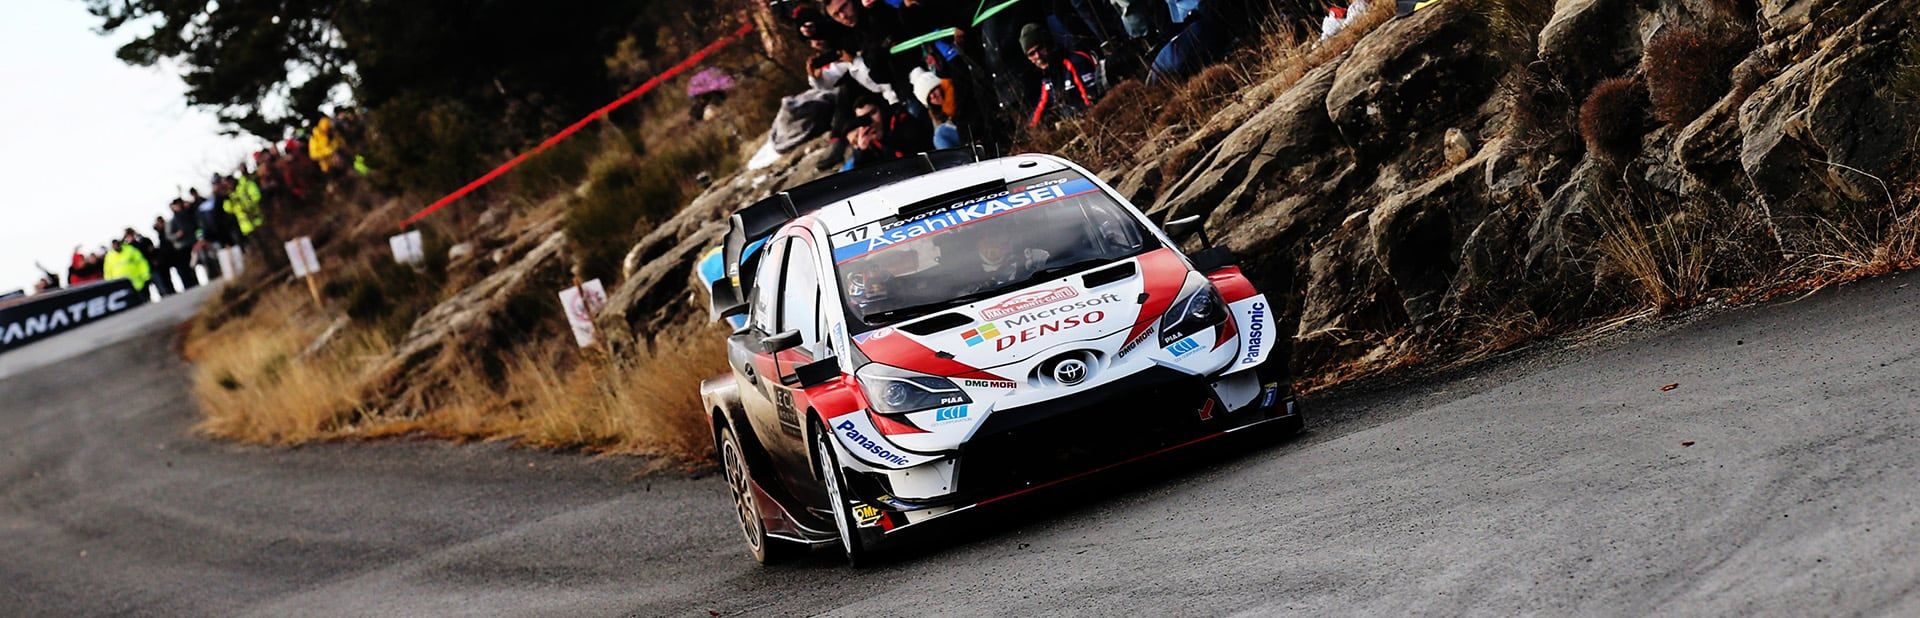 Rallye Monte Carlo: Day 4 Double Podium In Monte Carlo For New Toyota Yaris WRC Drivers. Toyota. Global Newsroom. Toyota Motor Corporation Official Global Website